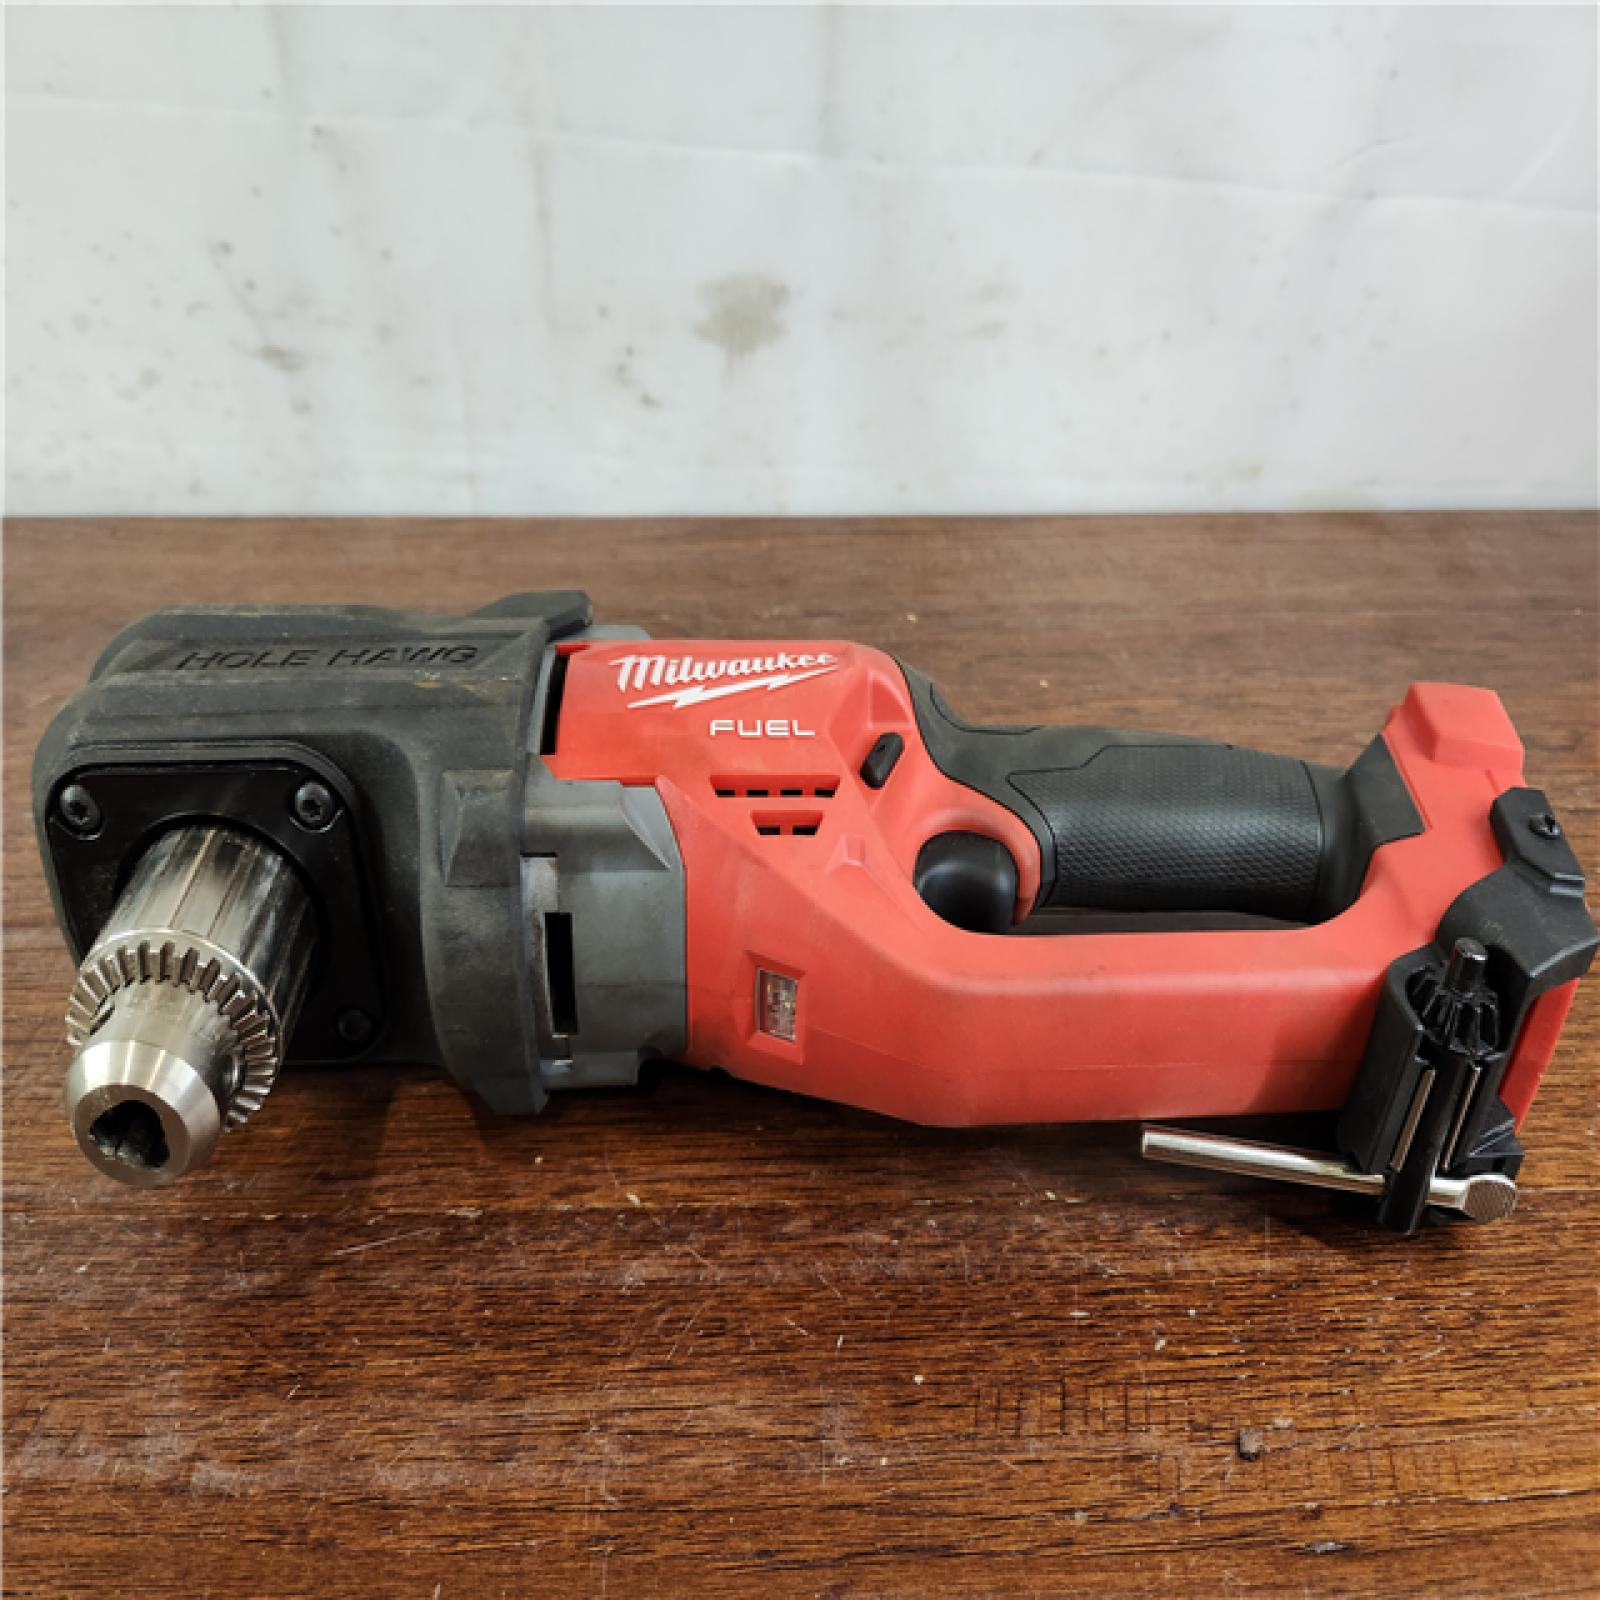 AS-IS Milwaukee M18 FUEL GEN II Brushless Cordless 1/2 in. Hole Hawg Right Angle Drill (Tool-Only)